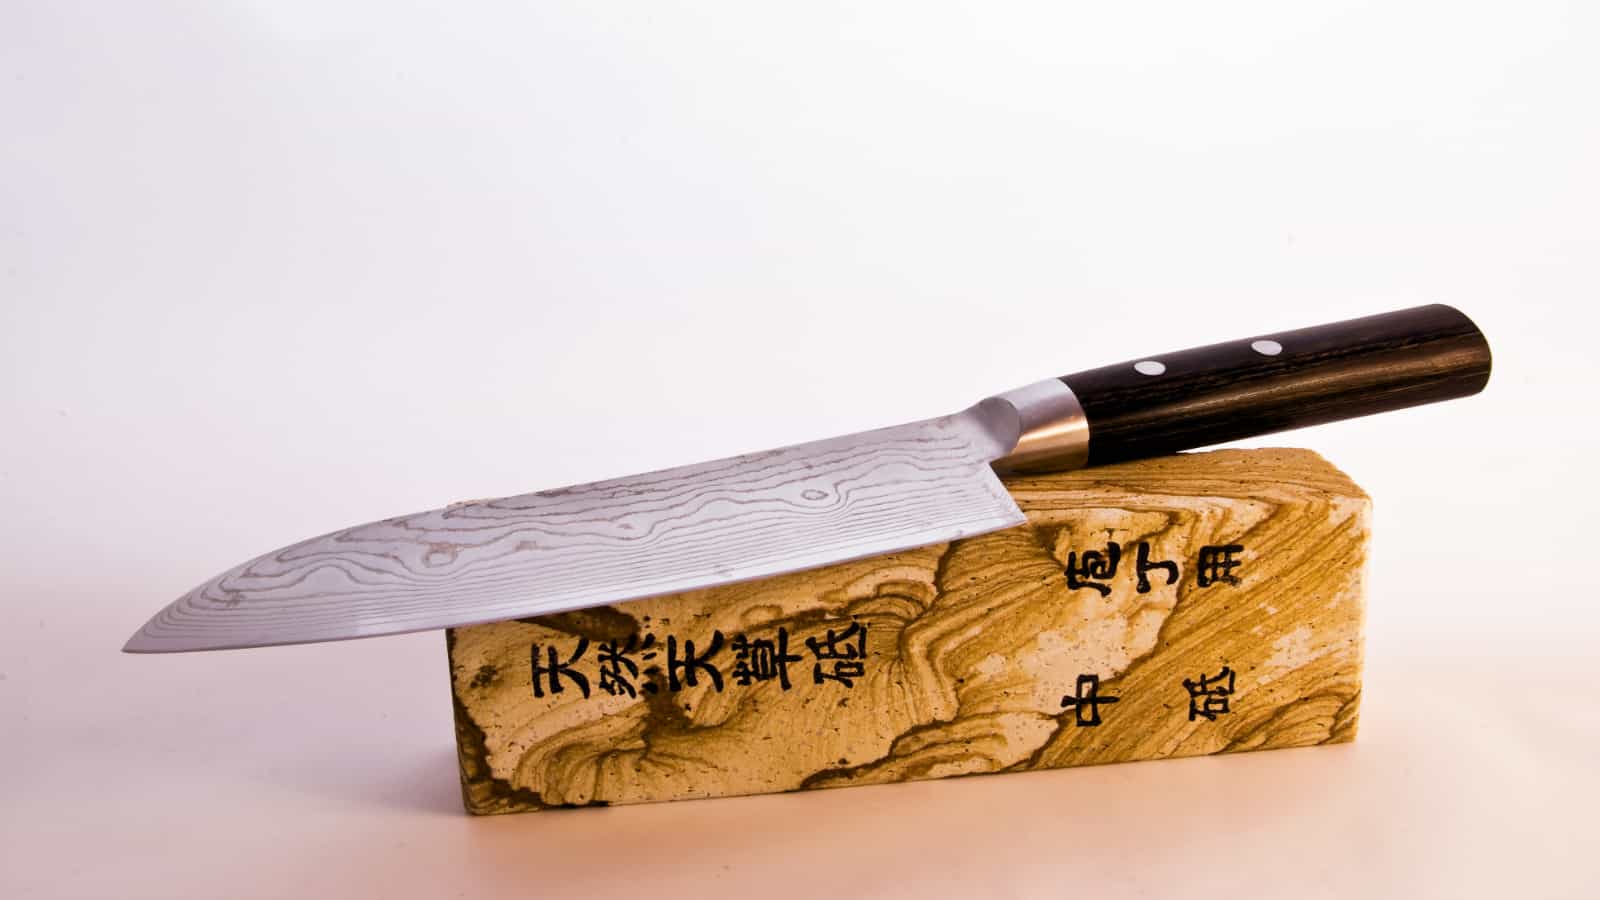 Detail of a Japanese kitchen knife made out of Damascus steel